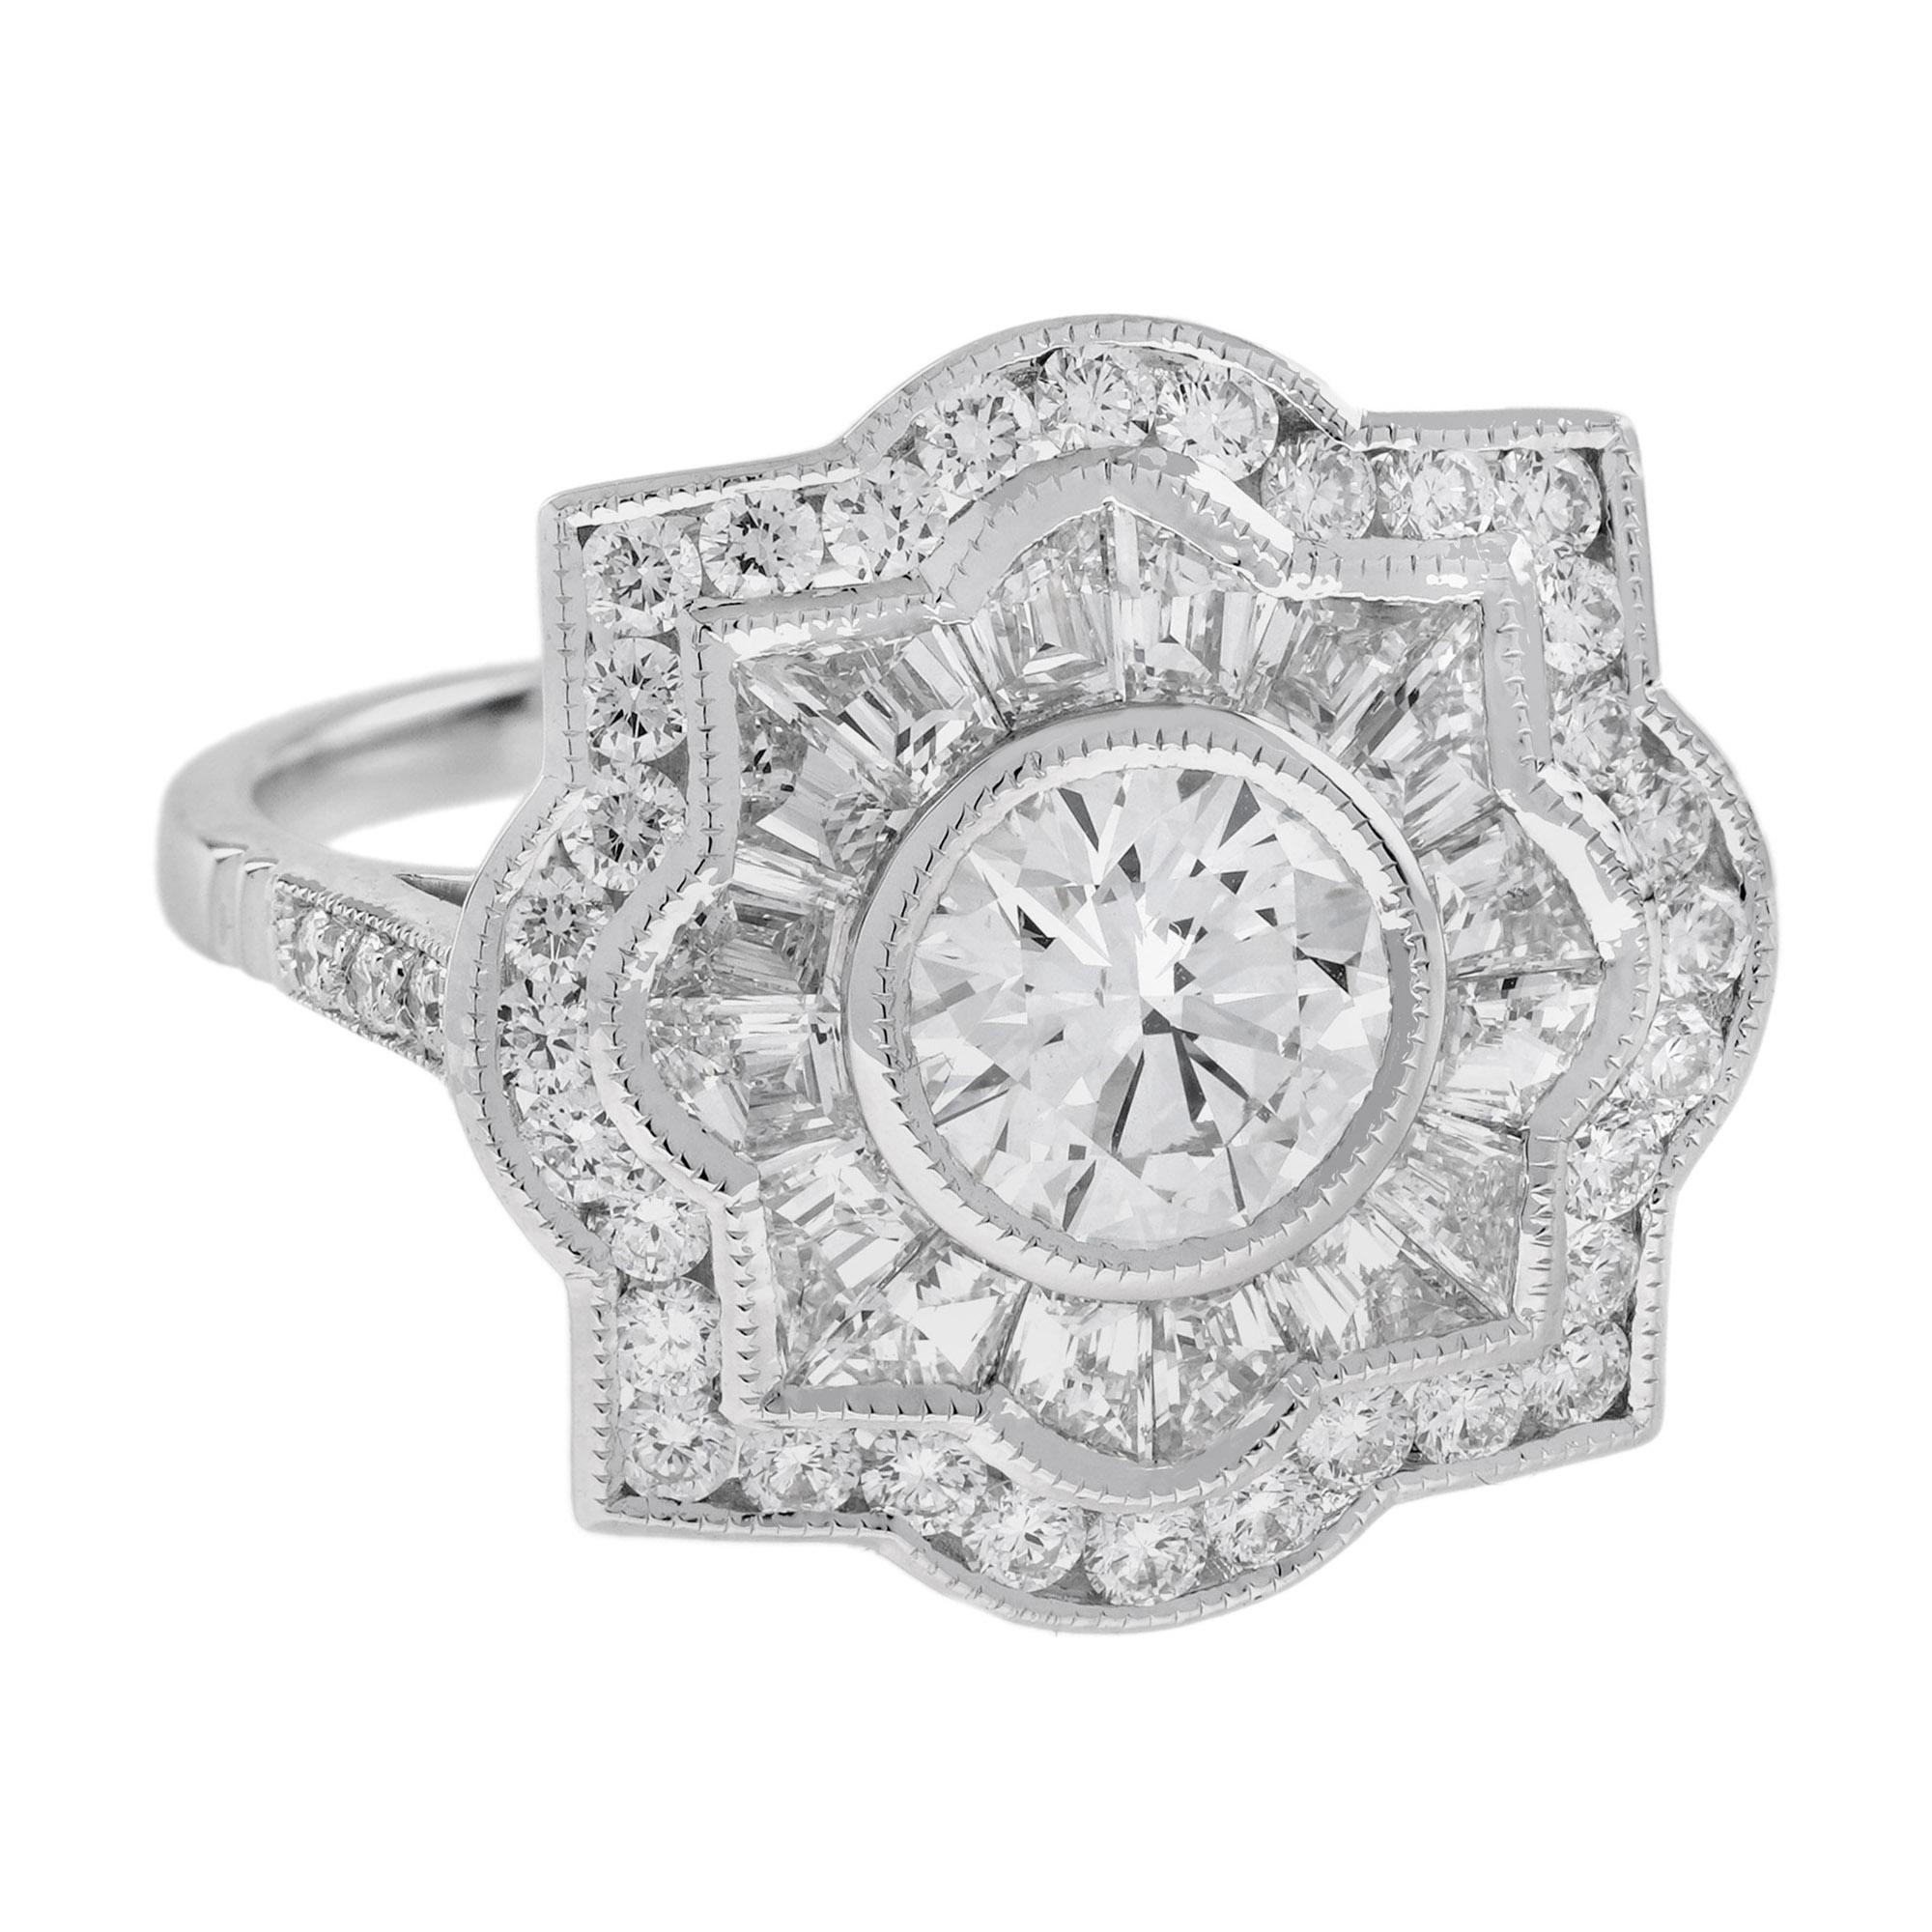 For Sale:  1.00 Ct. Diamond Art Deco Style Target Engagement Ring in 18K White Gold 5